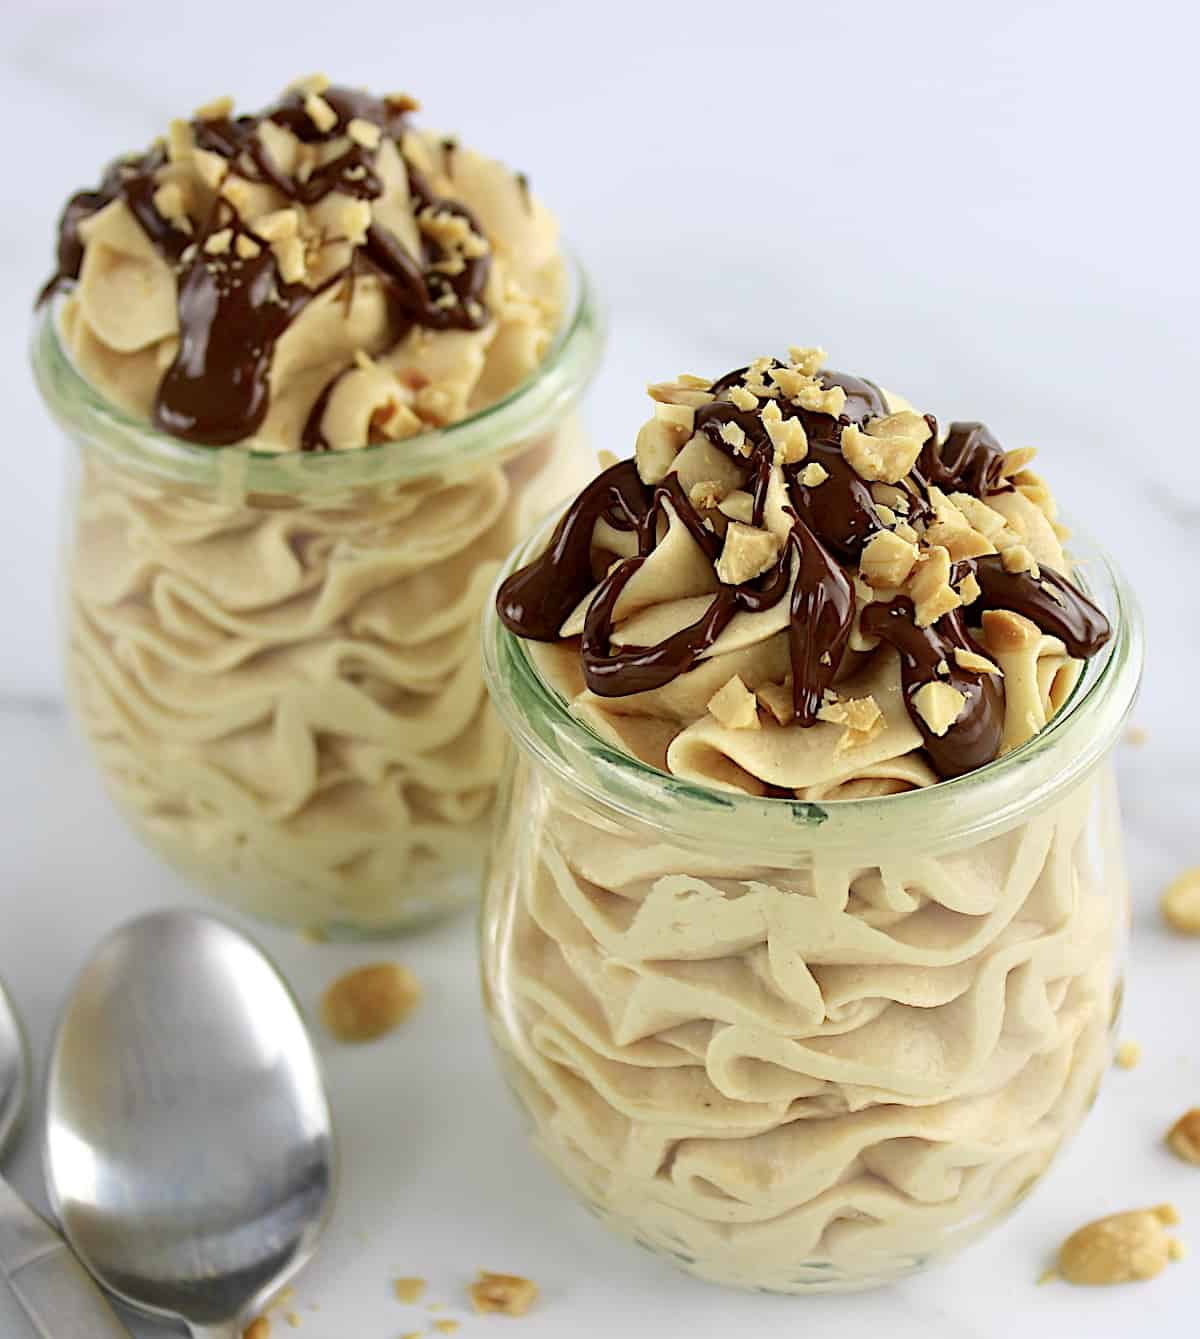 2 jars of Peanut Butter Mousse with melted chocolate and chopped peanuts on top